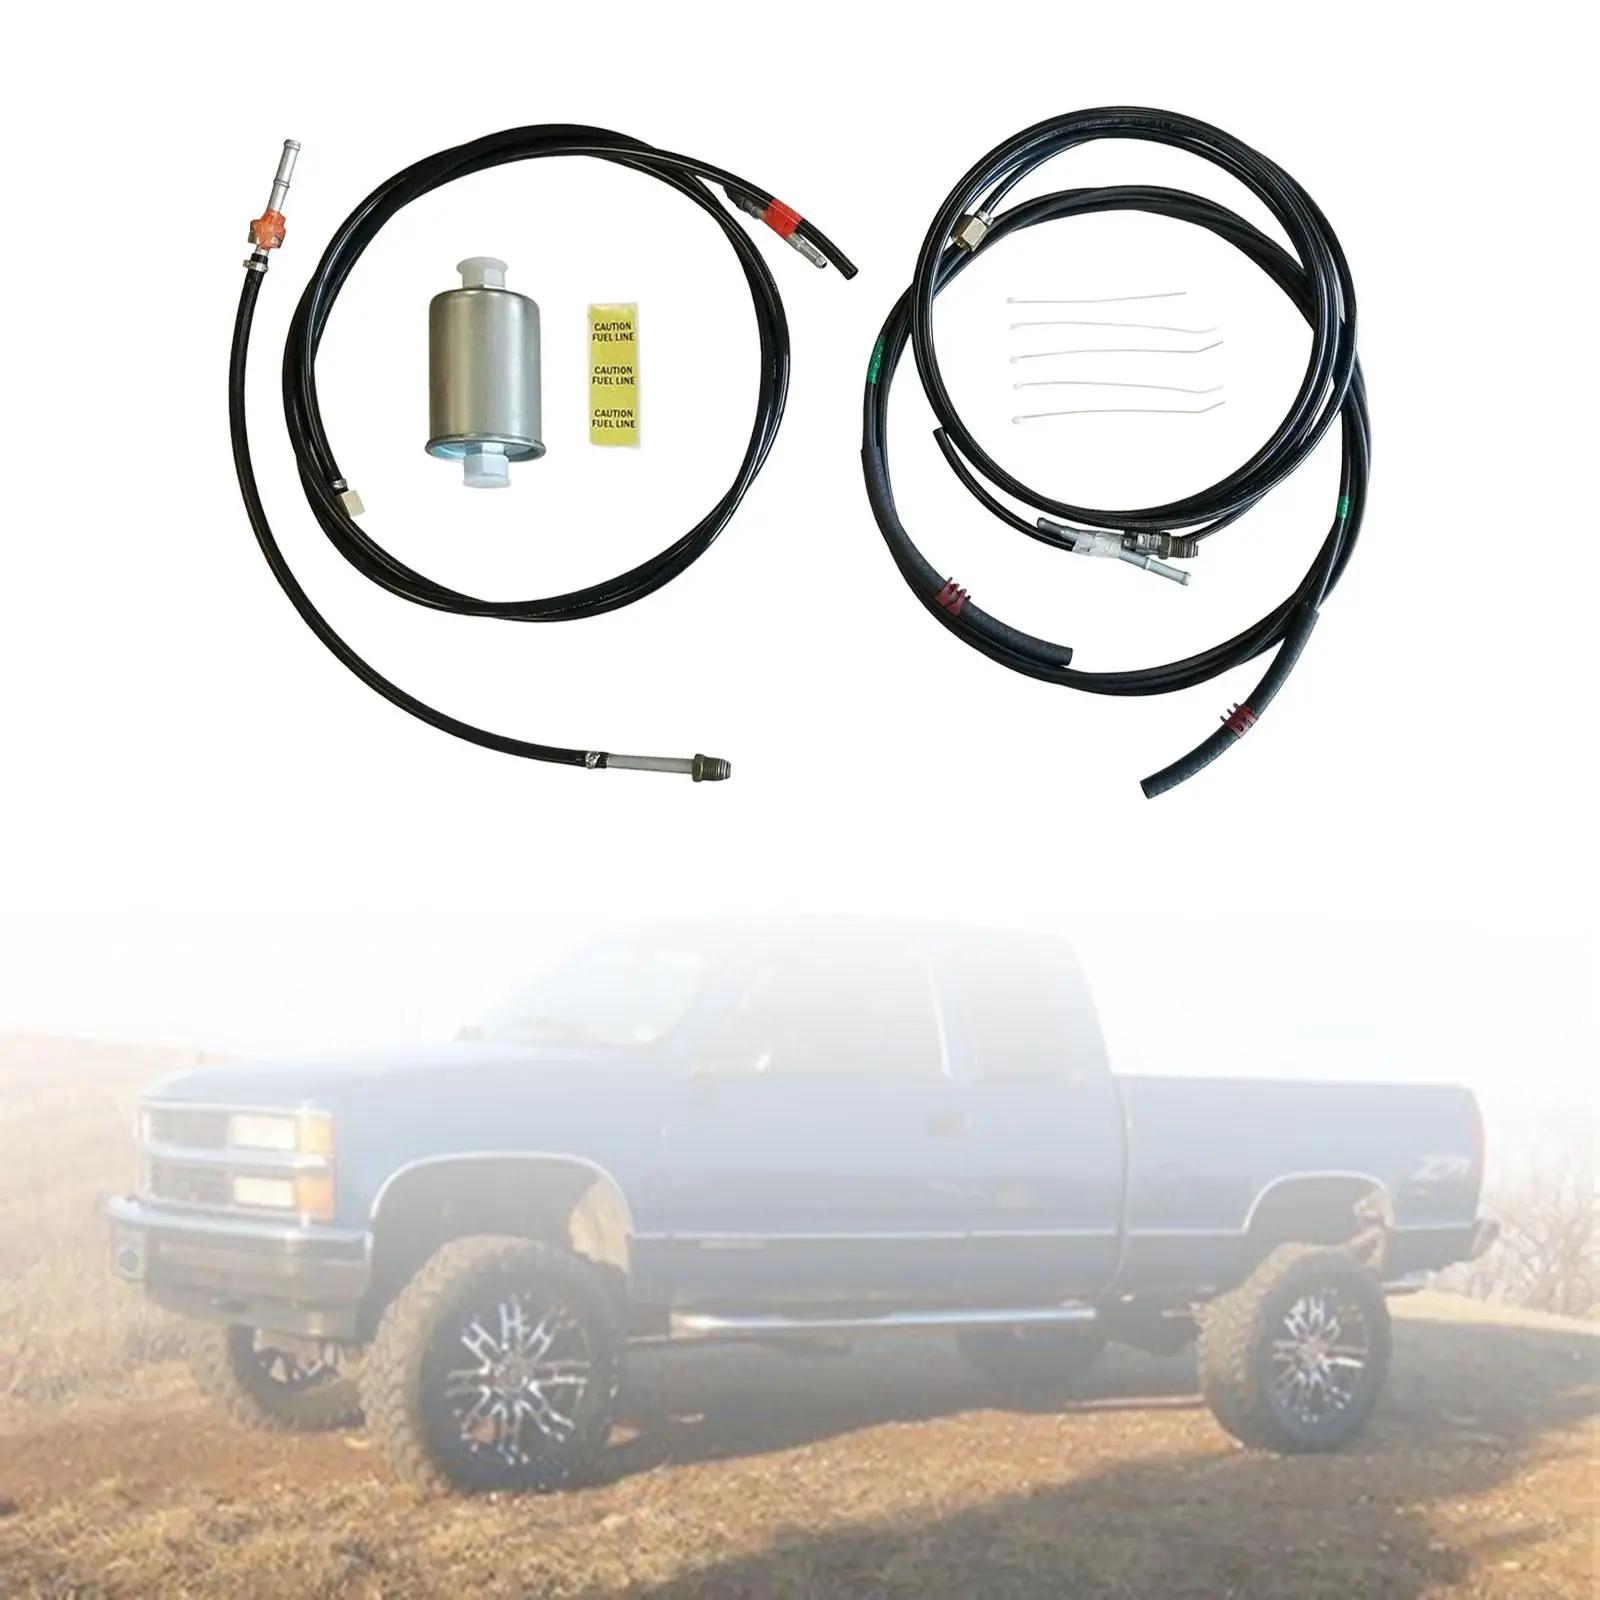 Fuel Lines Nfr0013 Spare Parts Durable Accessories Replacement Replacement Tube Set for GMC 1988-1997 Stable Performance